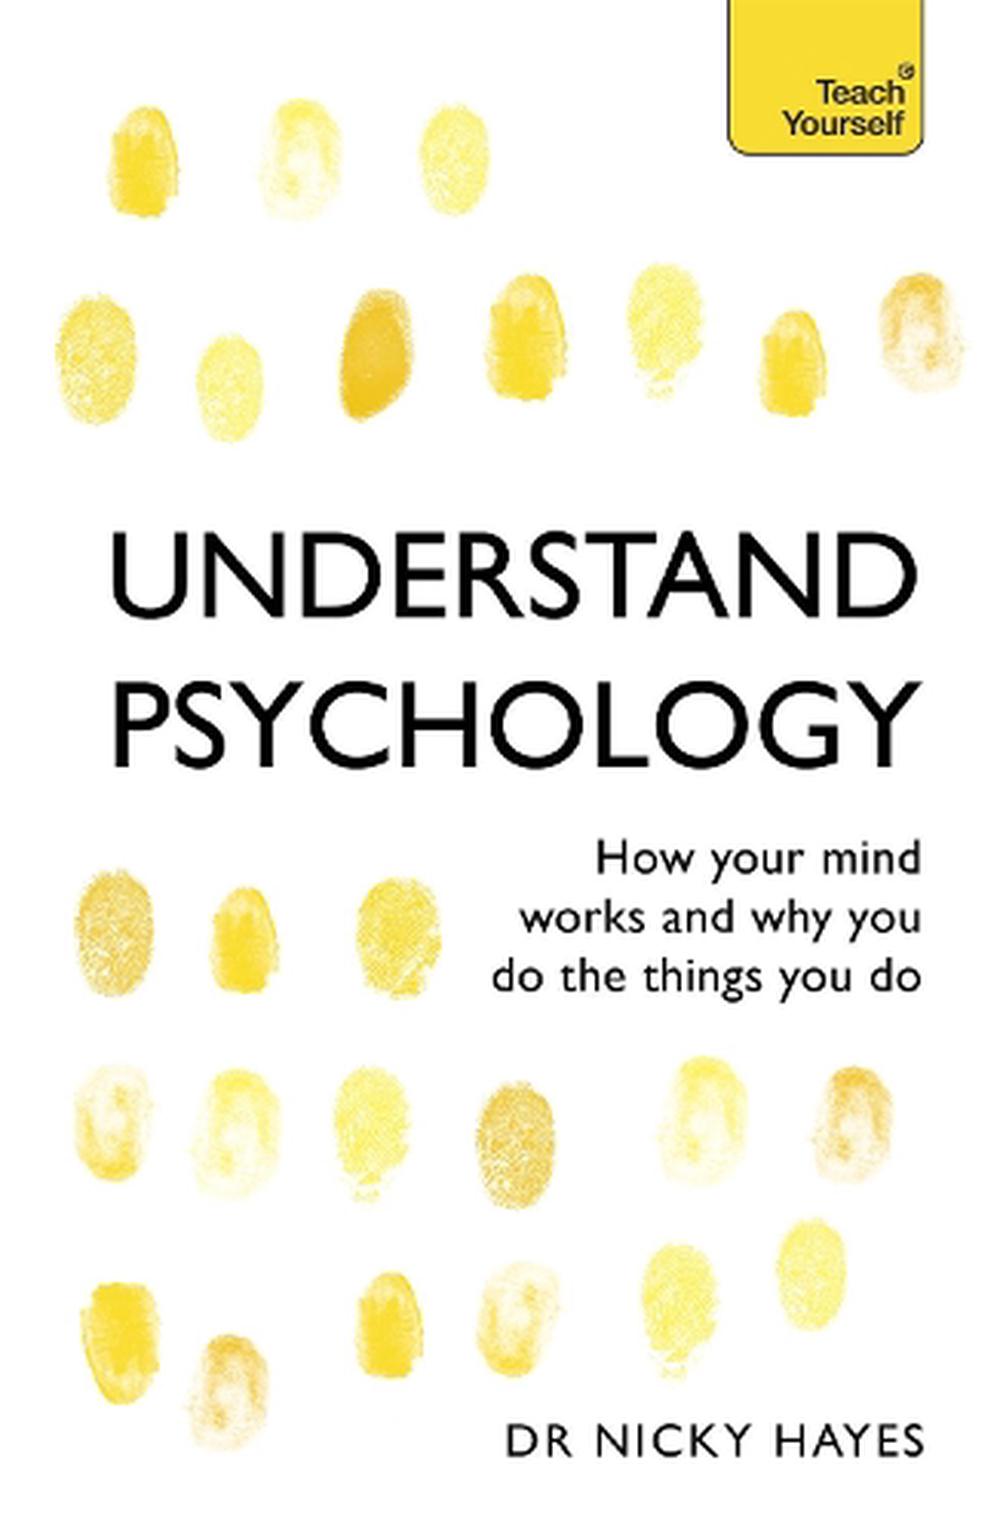 Understand Psychology By Nicky Hayes Paperback 9781444100907 Buy Online At The Nile 